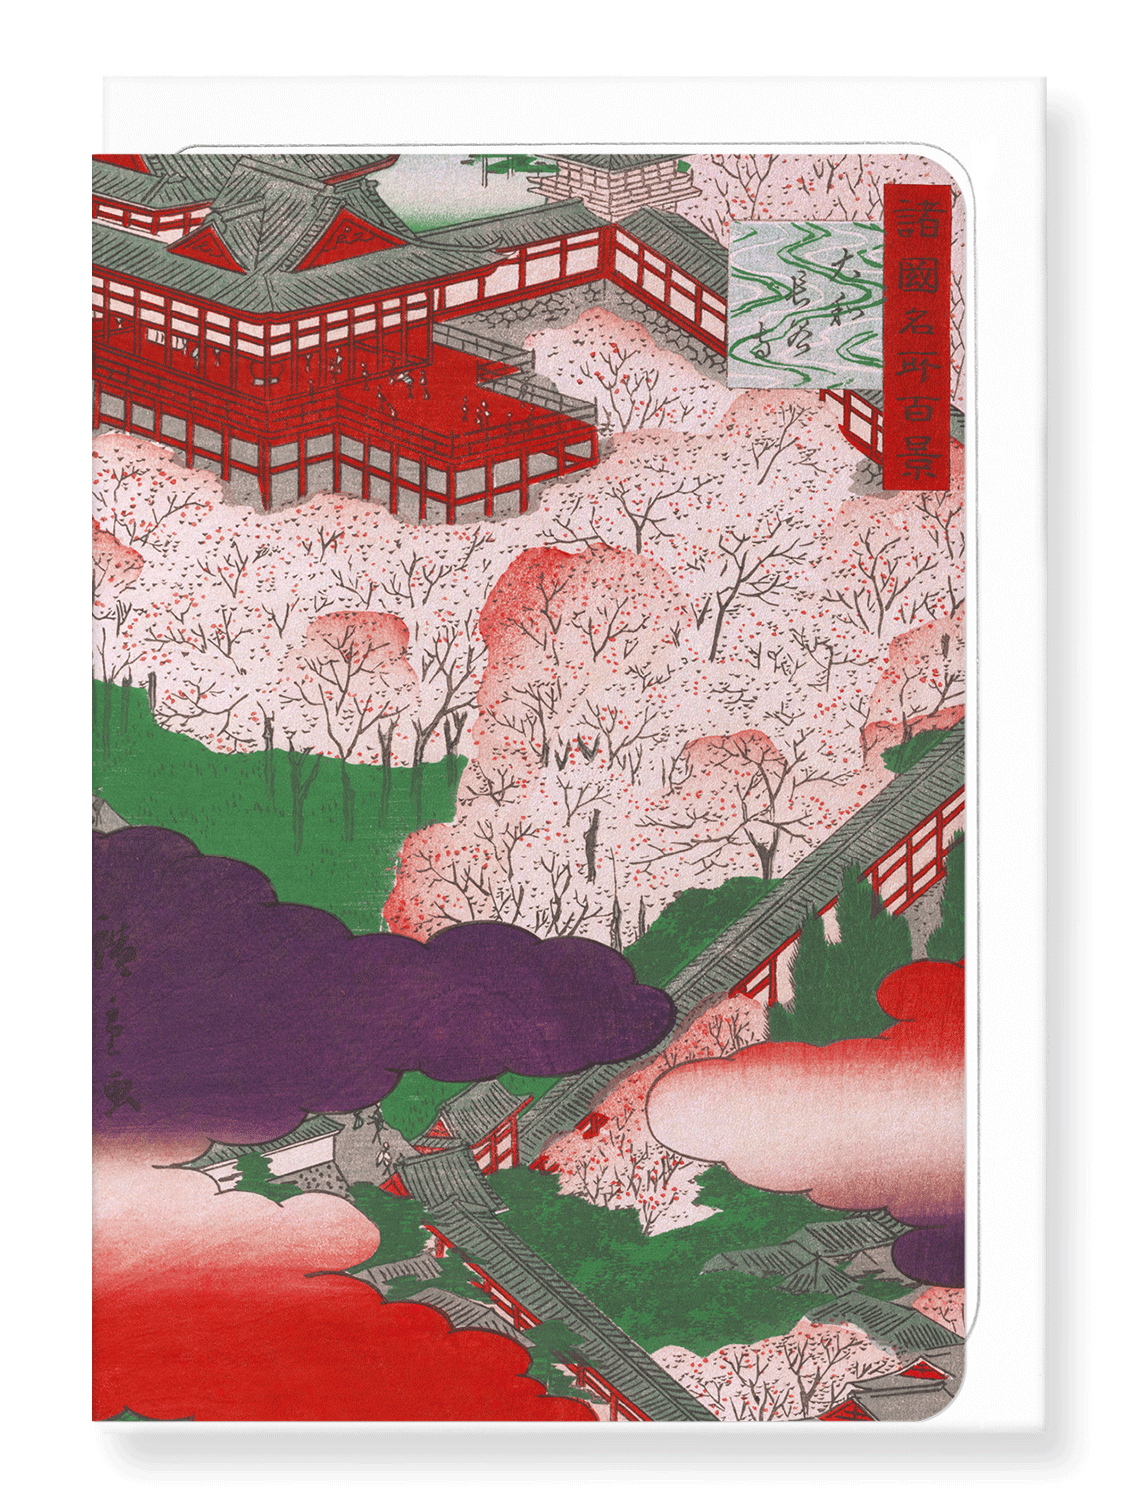 Ezen Designs - Yamato hase temple - Greeting Card - Front